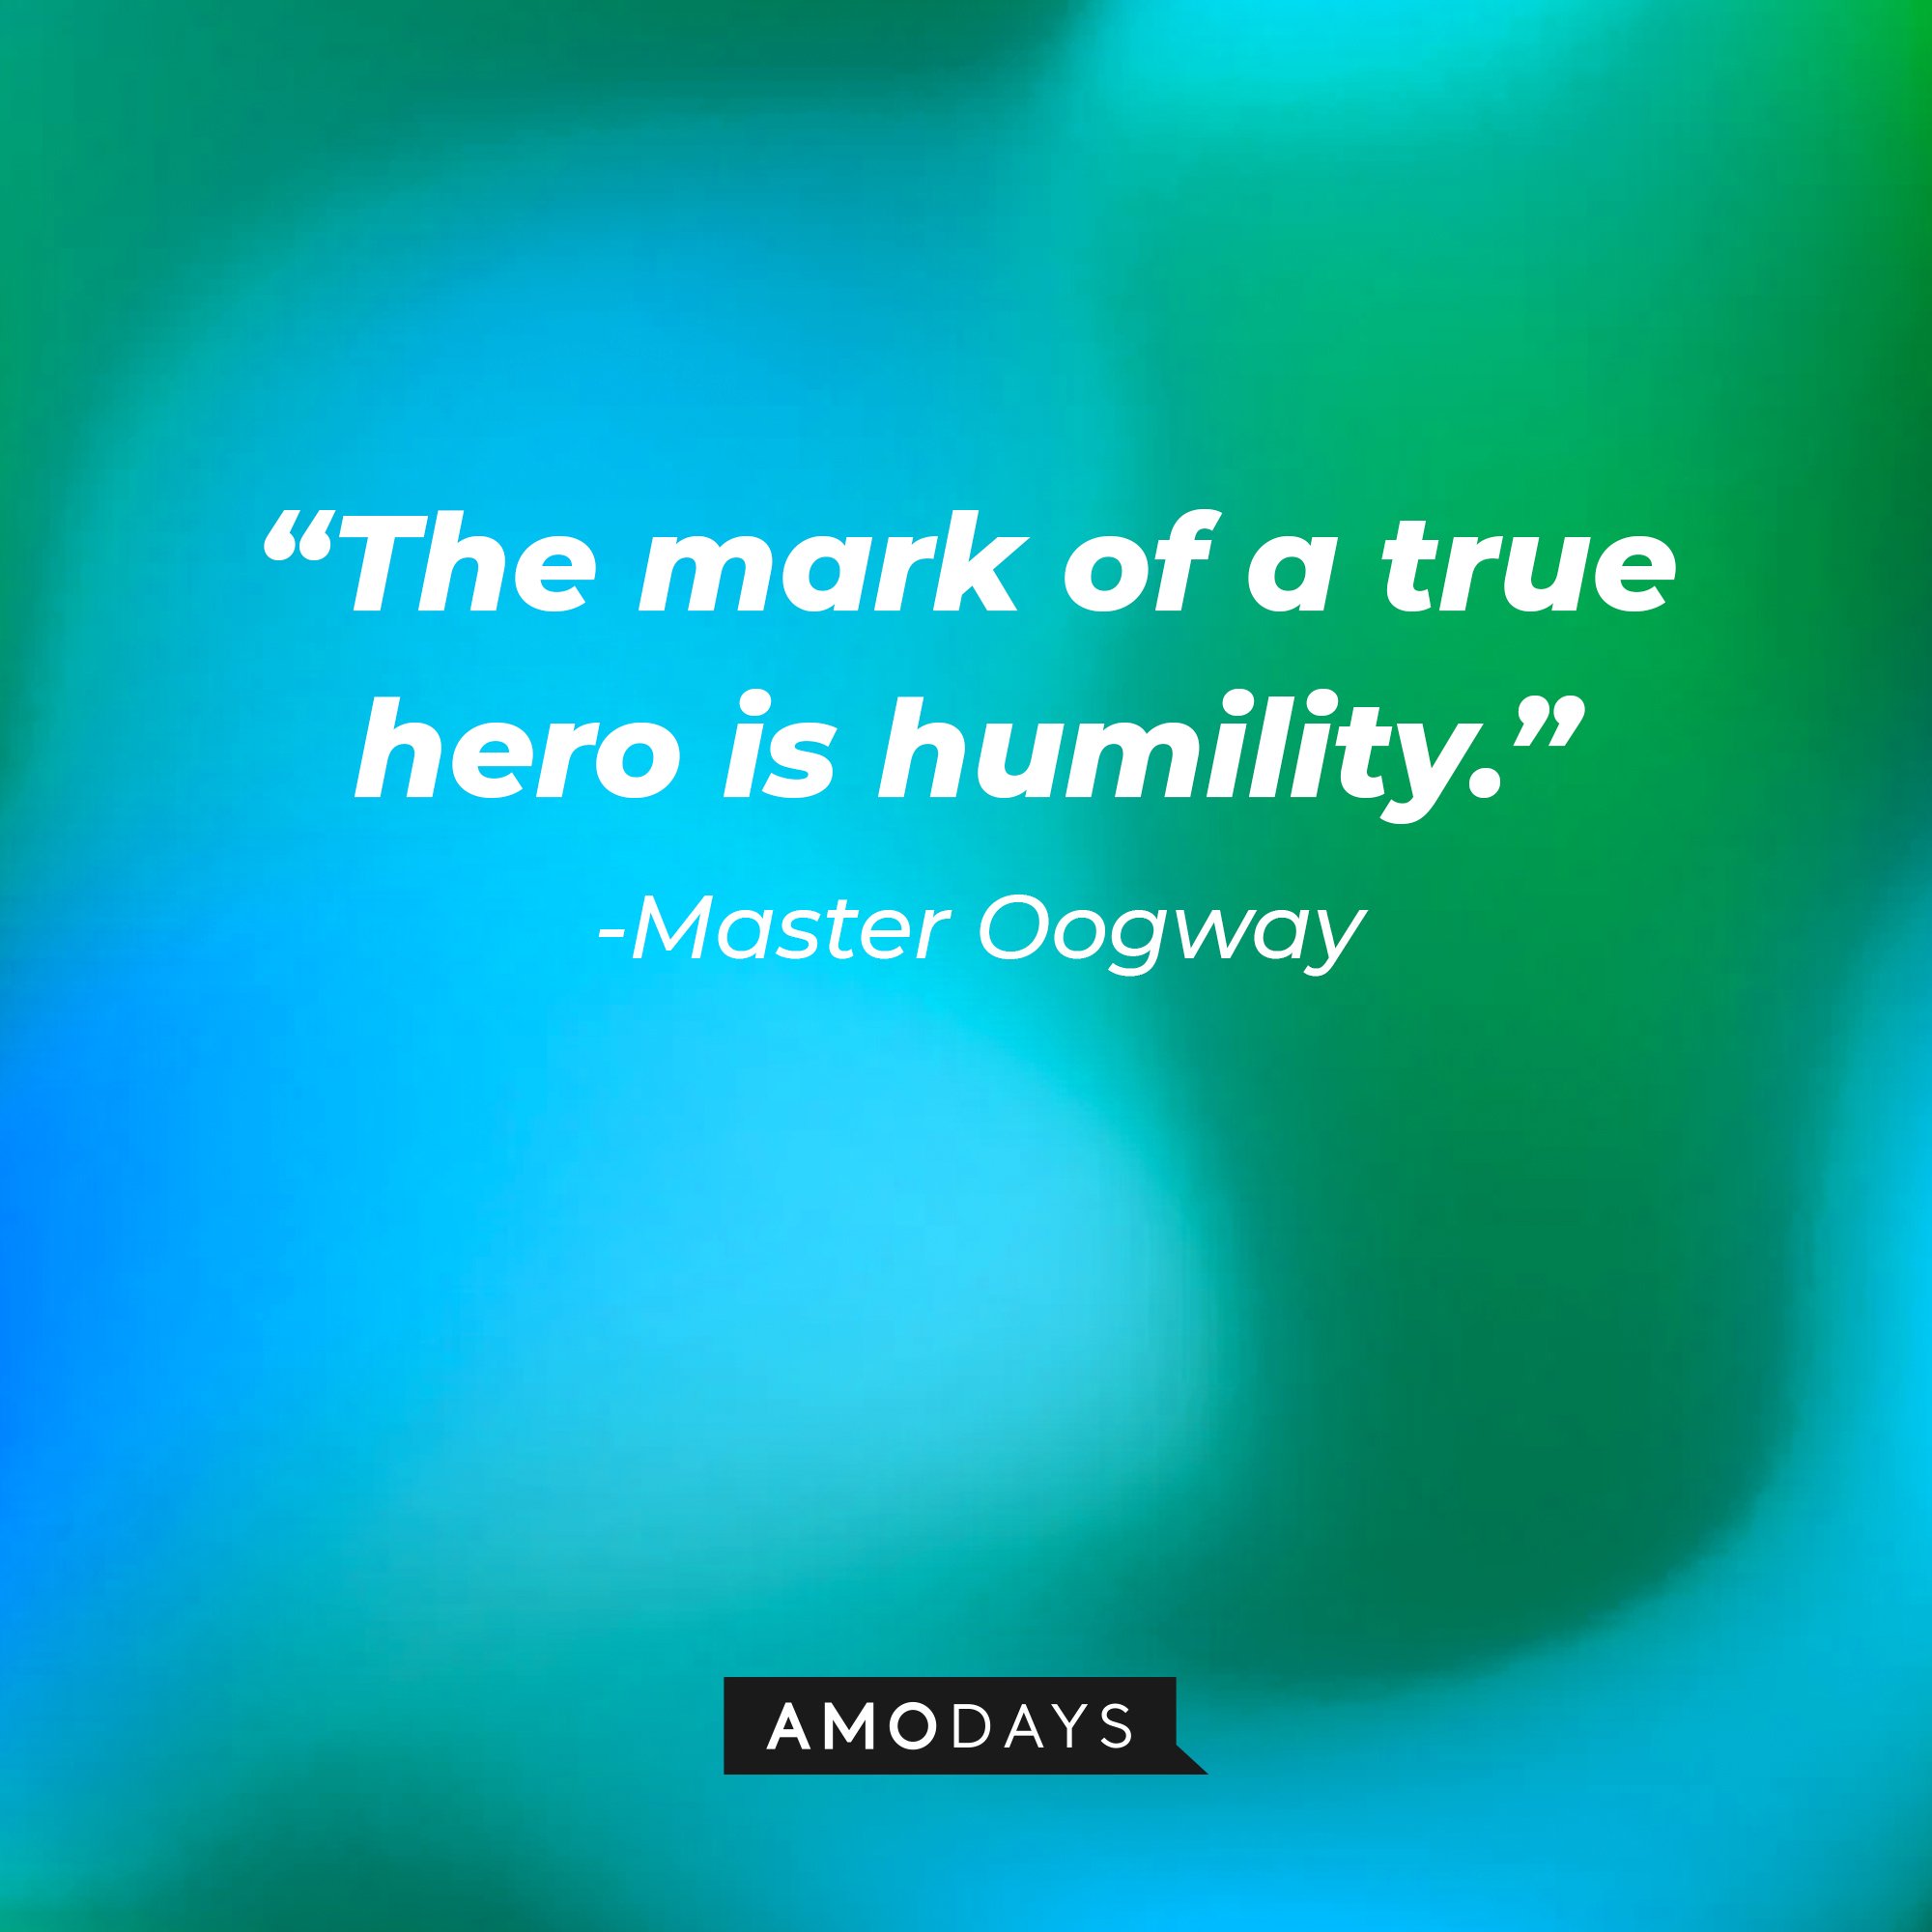 Master Oogway's quote: “The mark of a true hero is humility.” | Image: AmoDays